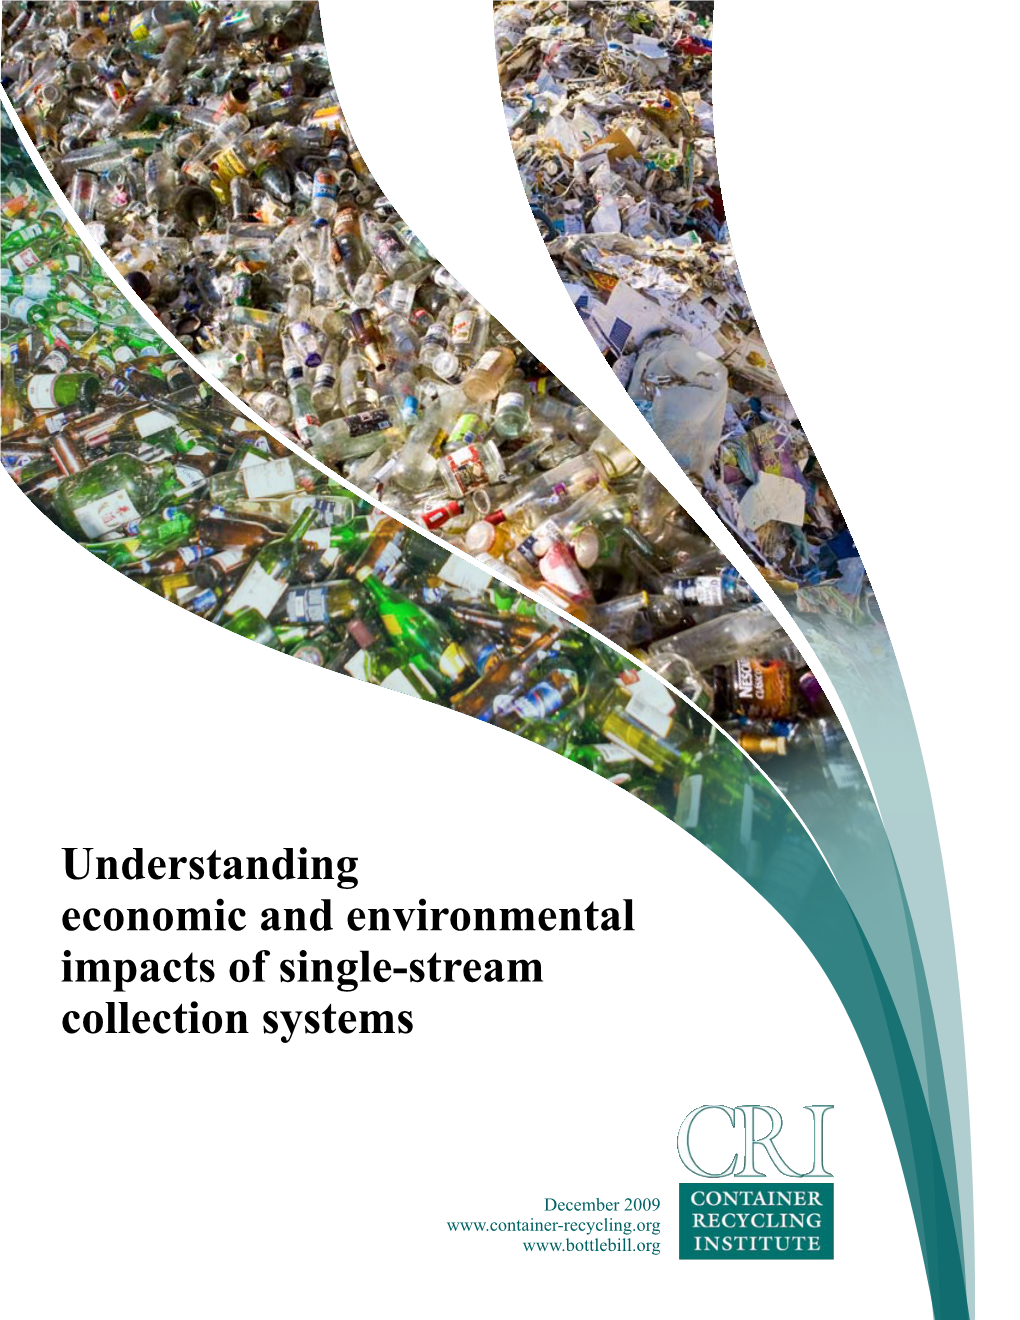 Understanding Economic and Environmental Impacts of Single-Stream Collection Systems